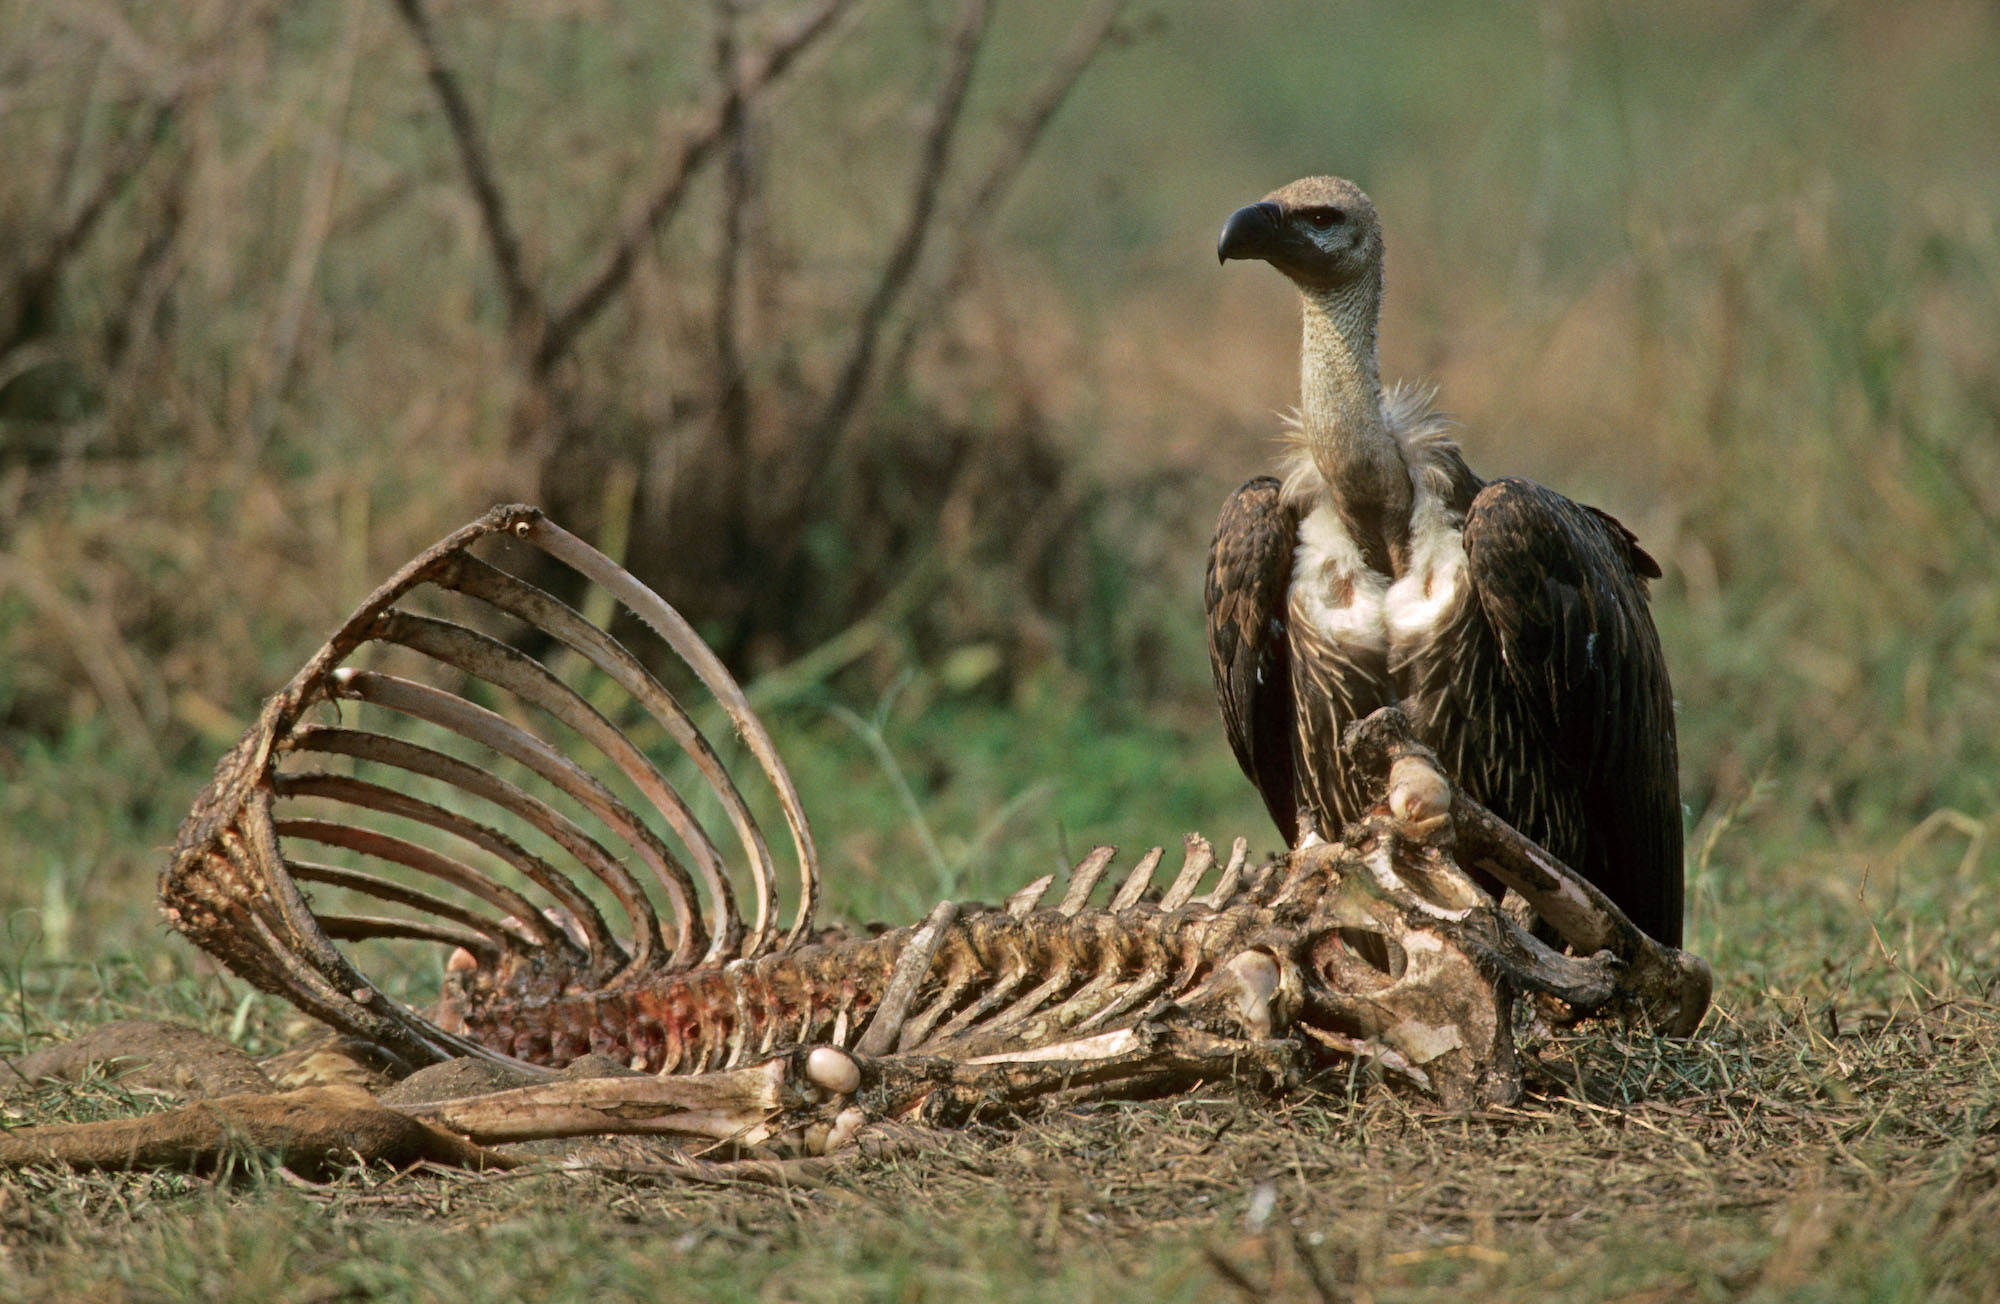 The Role of Scavengers: Carcass Crunching